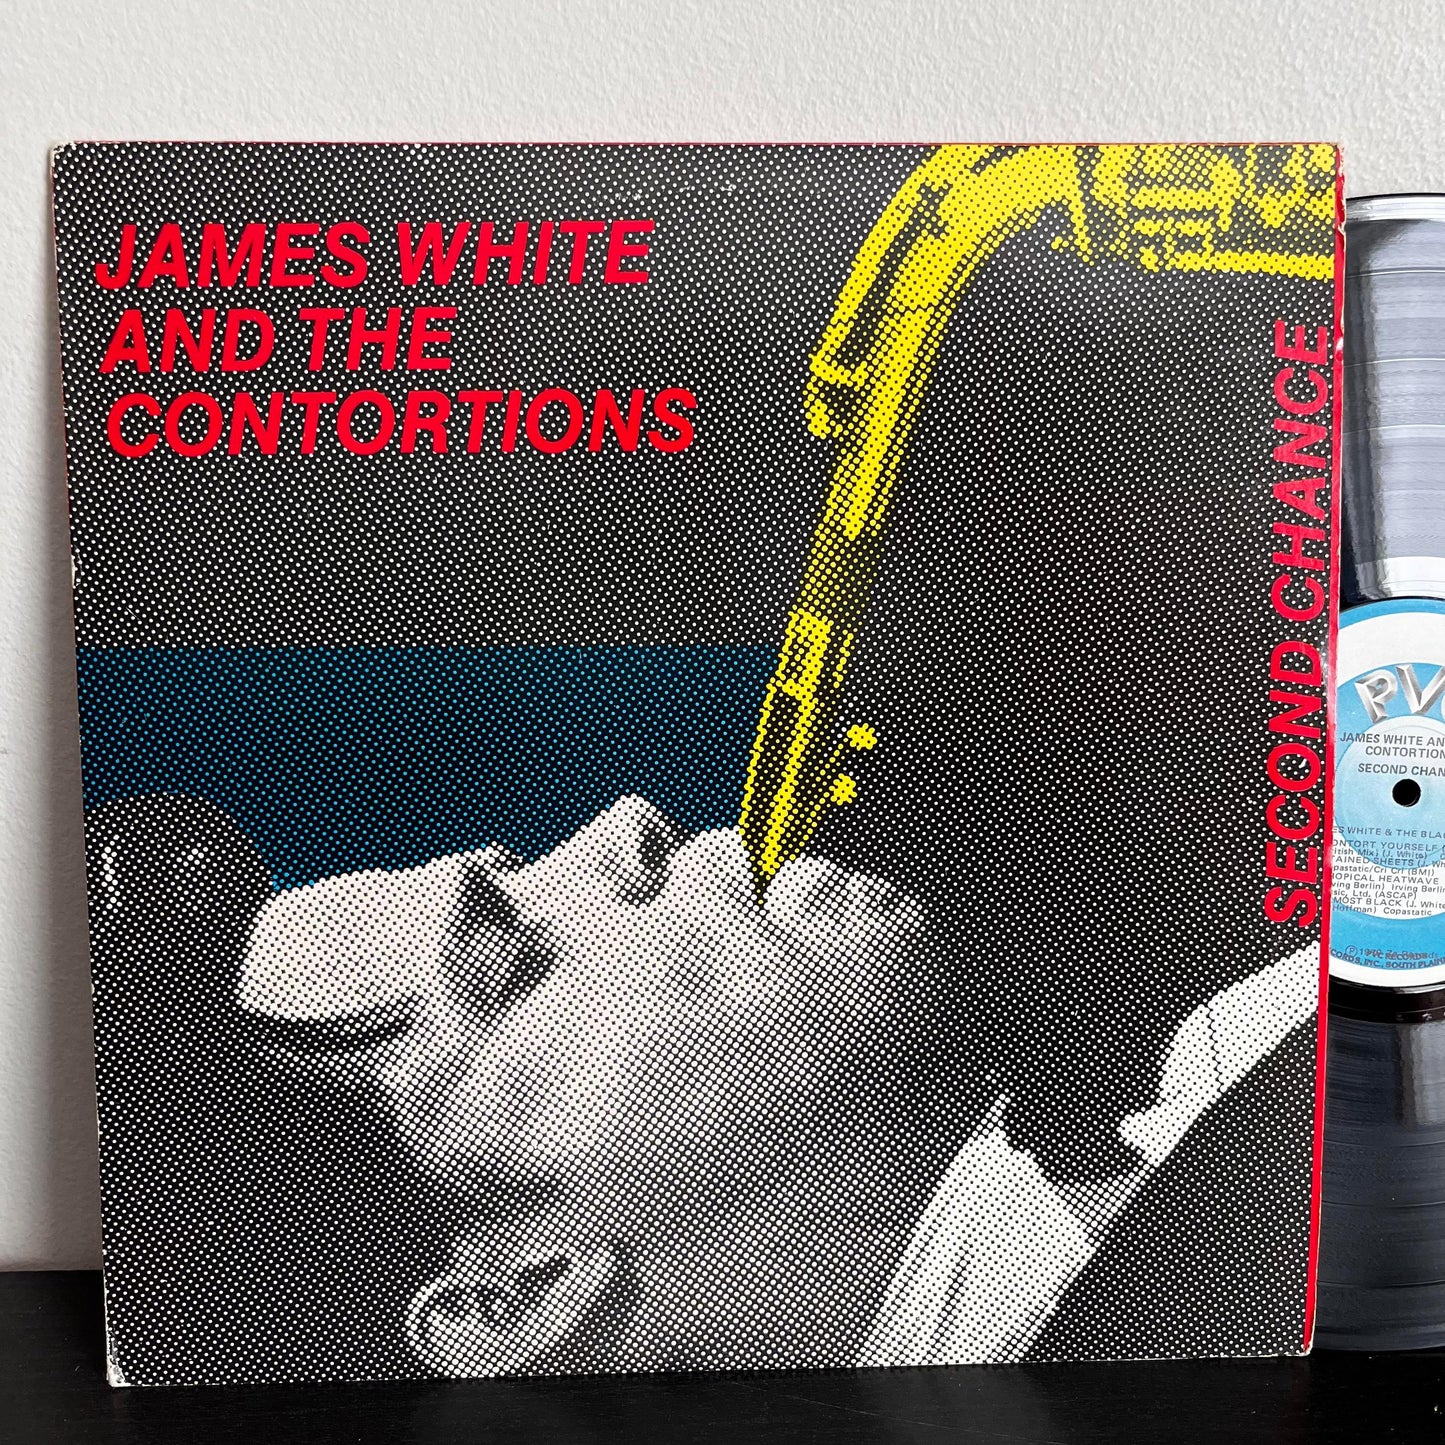 Second Chance - James White and the Contortions Vinyl PVC 7918 EX